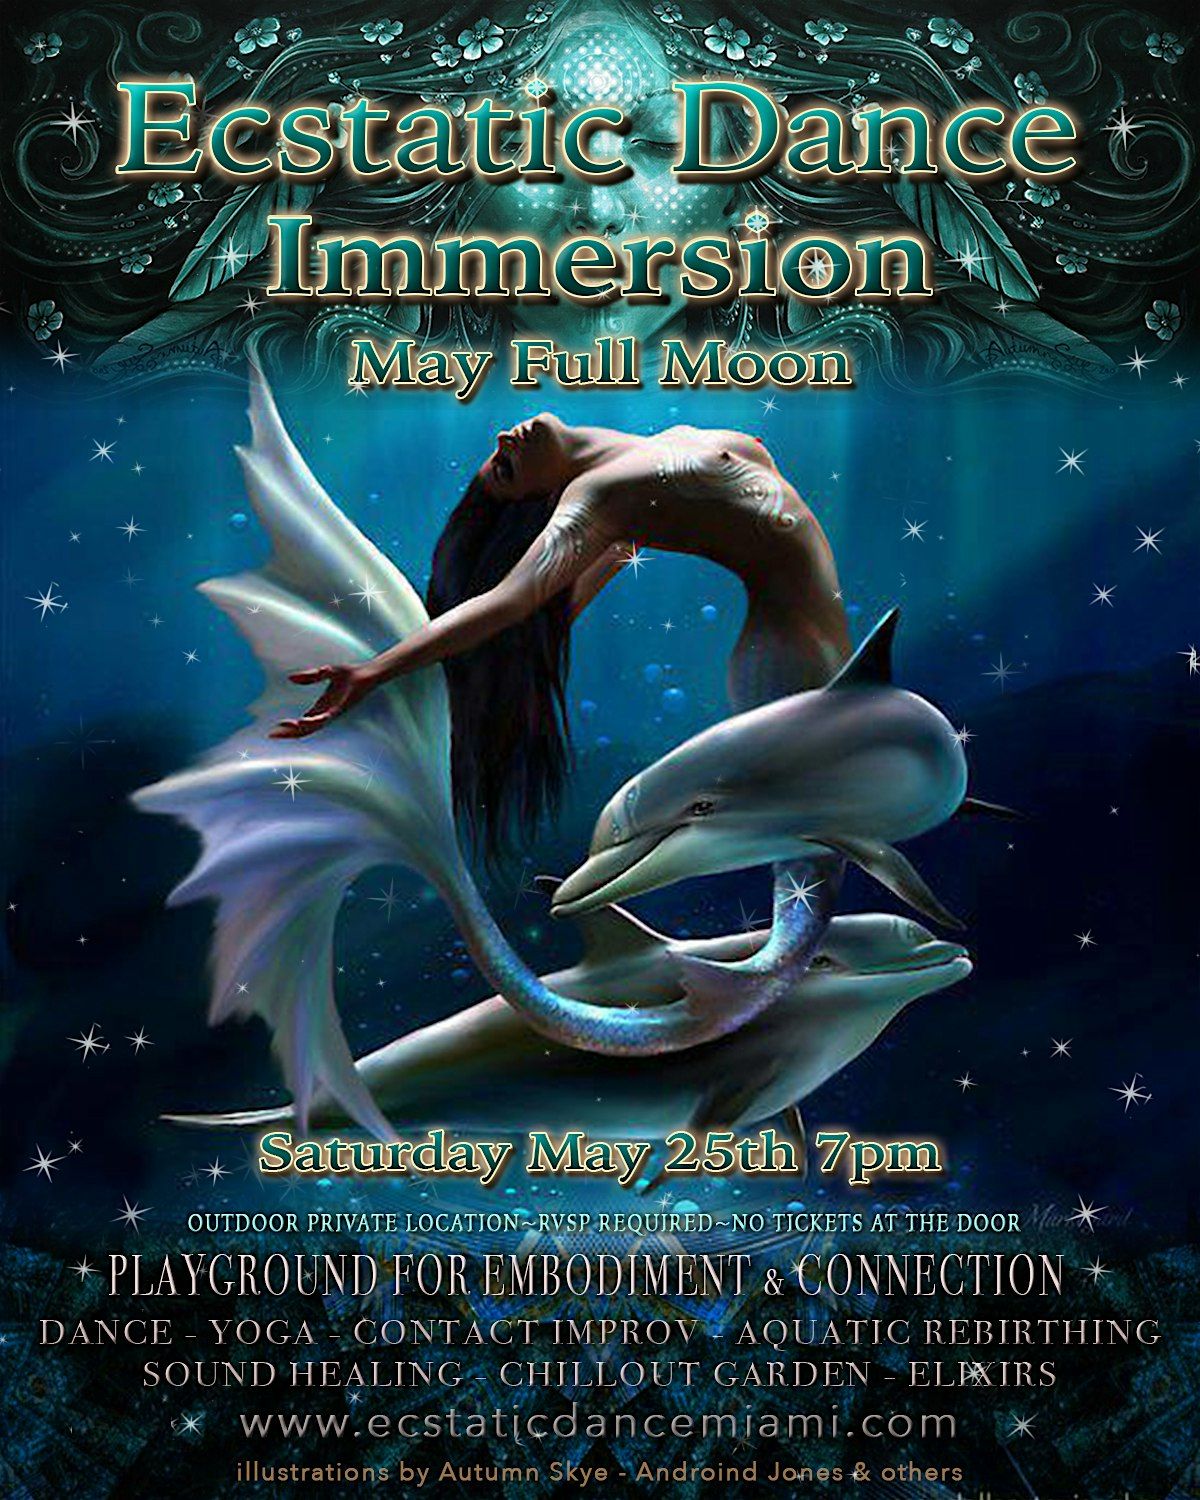 Ecstatic Dance Miami ~ May Full Moon Immersion